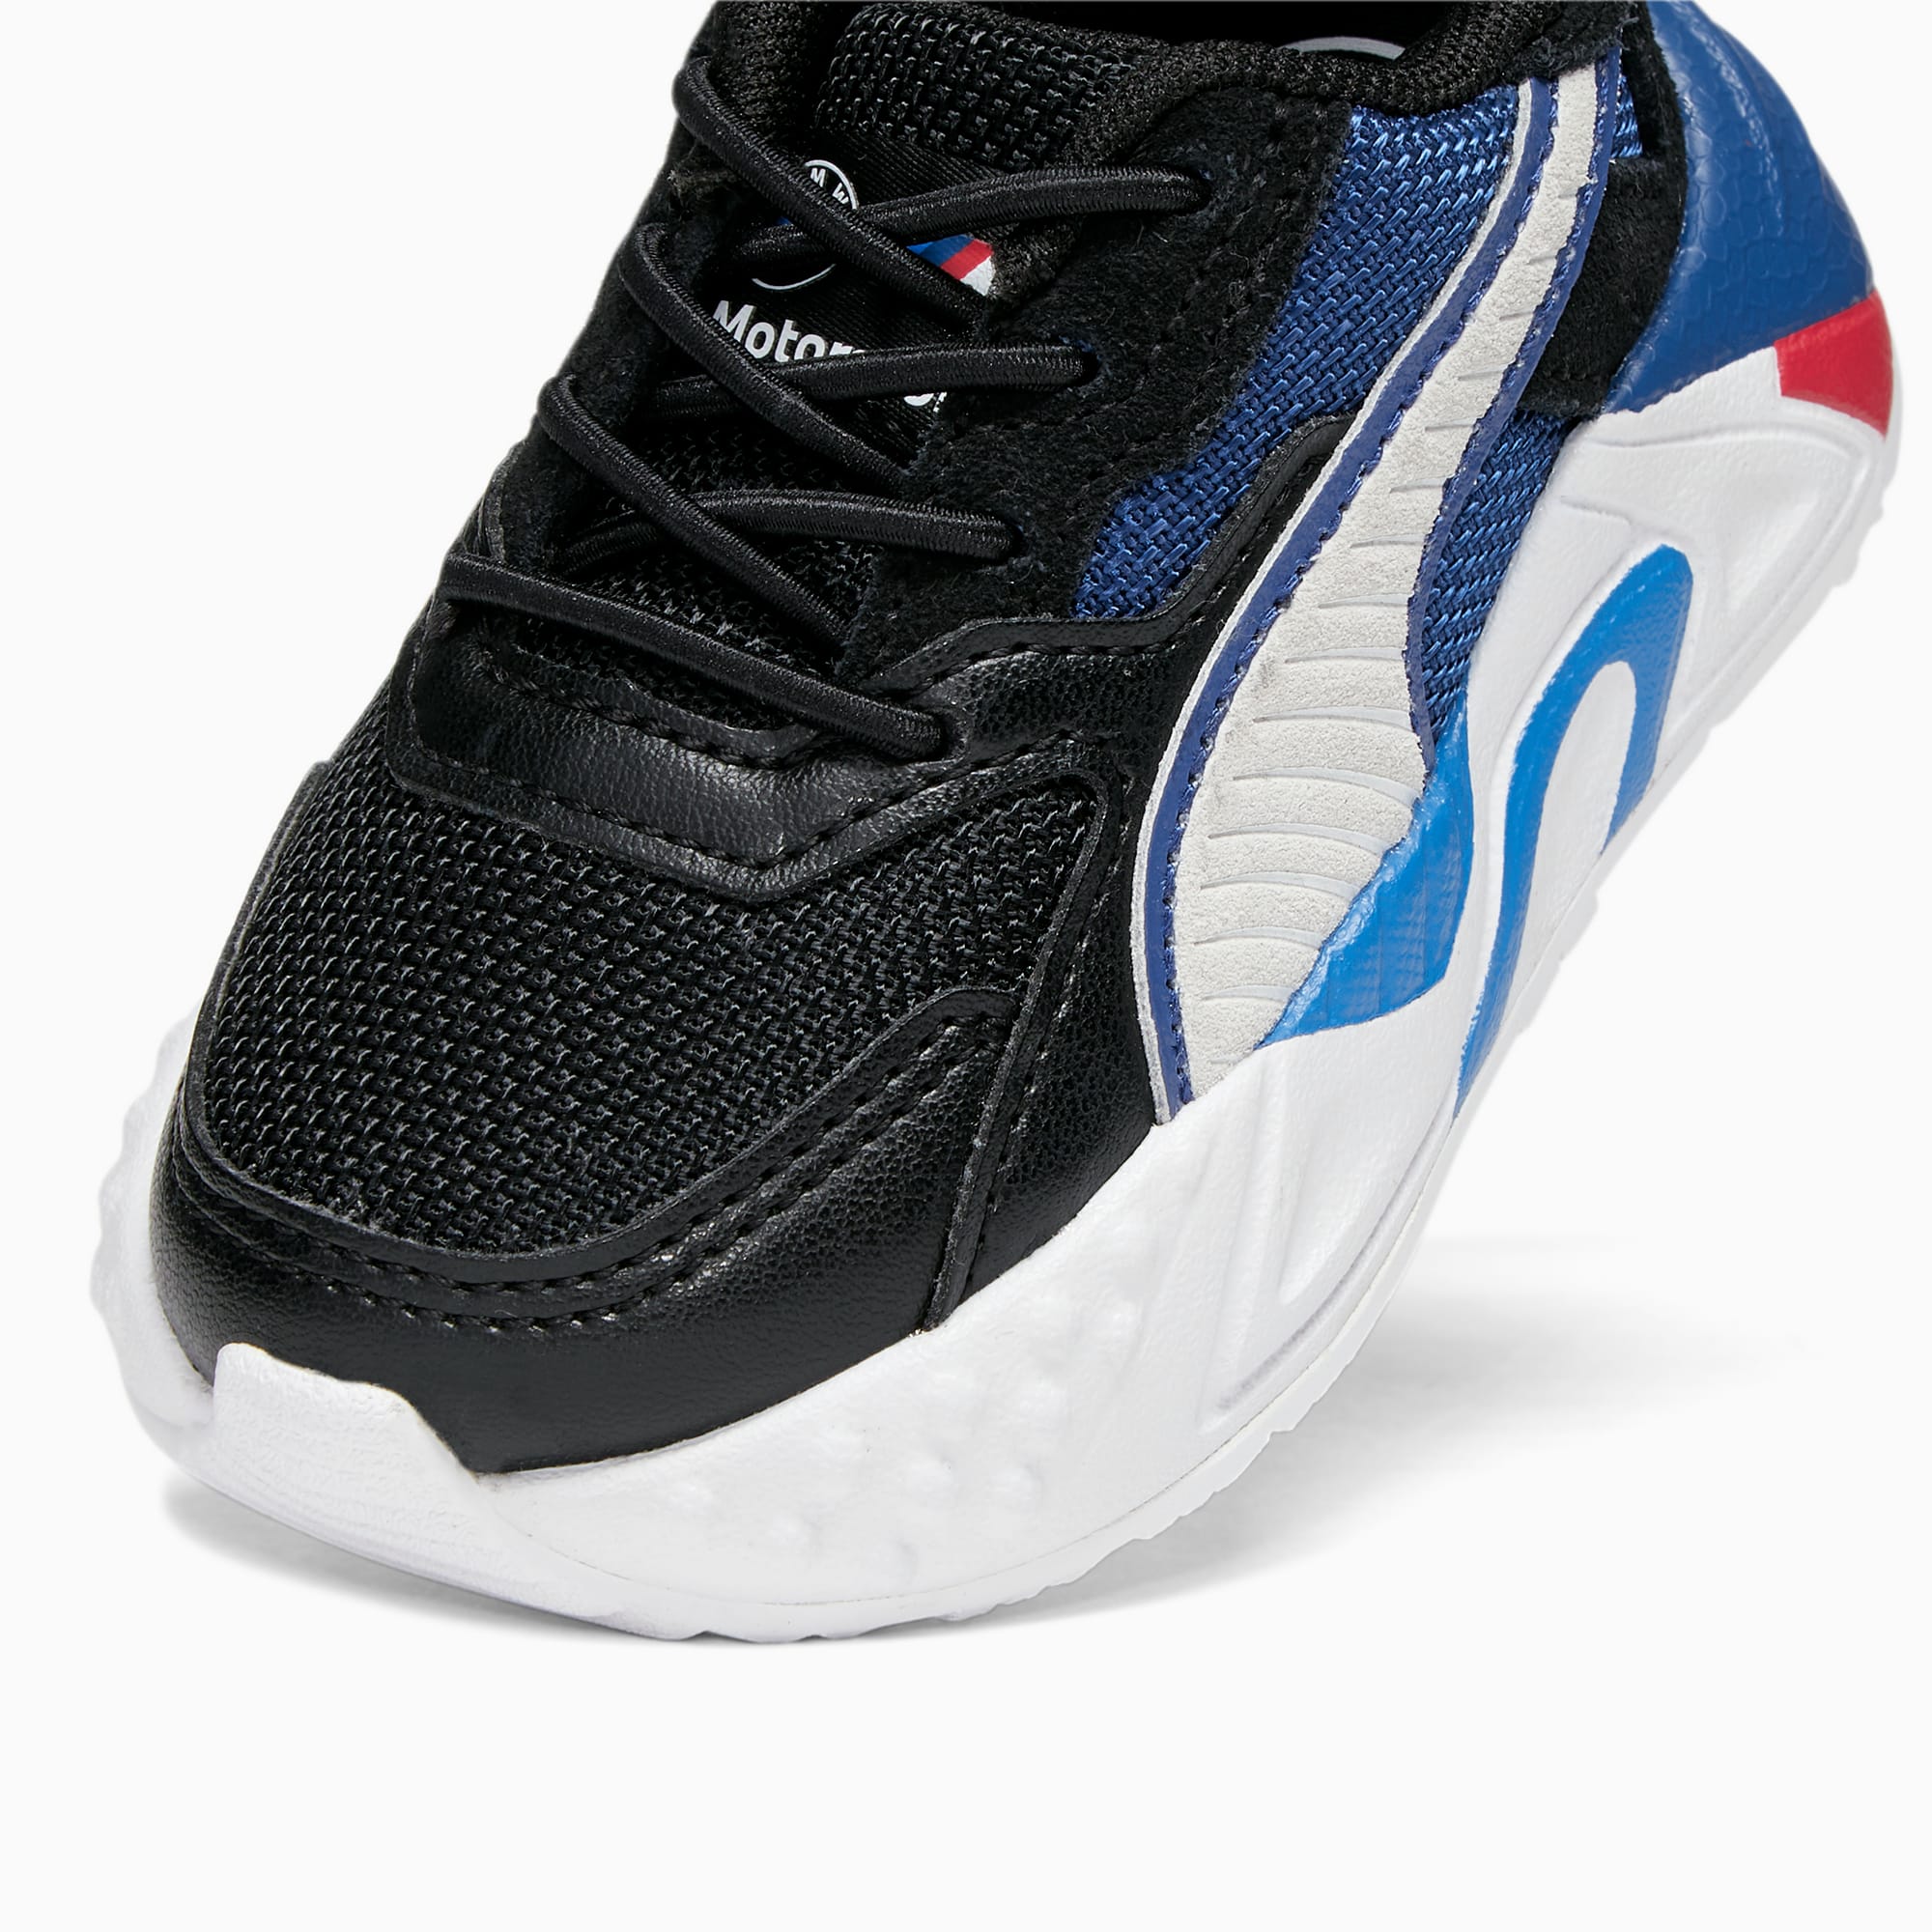 Puma BMW MMS RS-2K Men’s Athletic Sneaker Running Shoe Casual Trainer